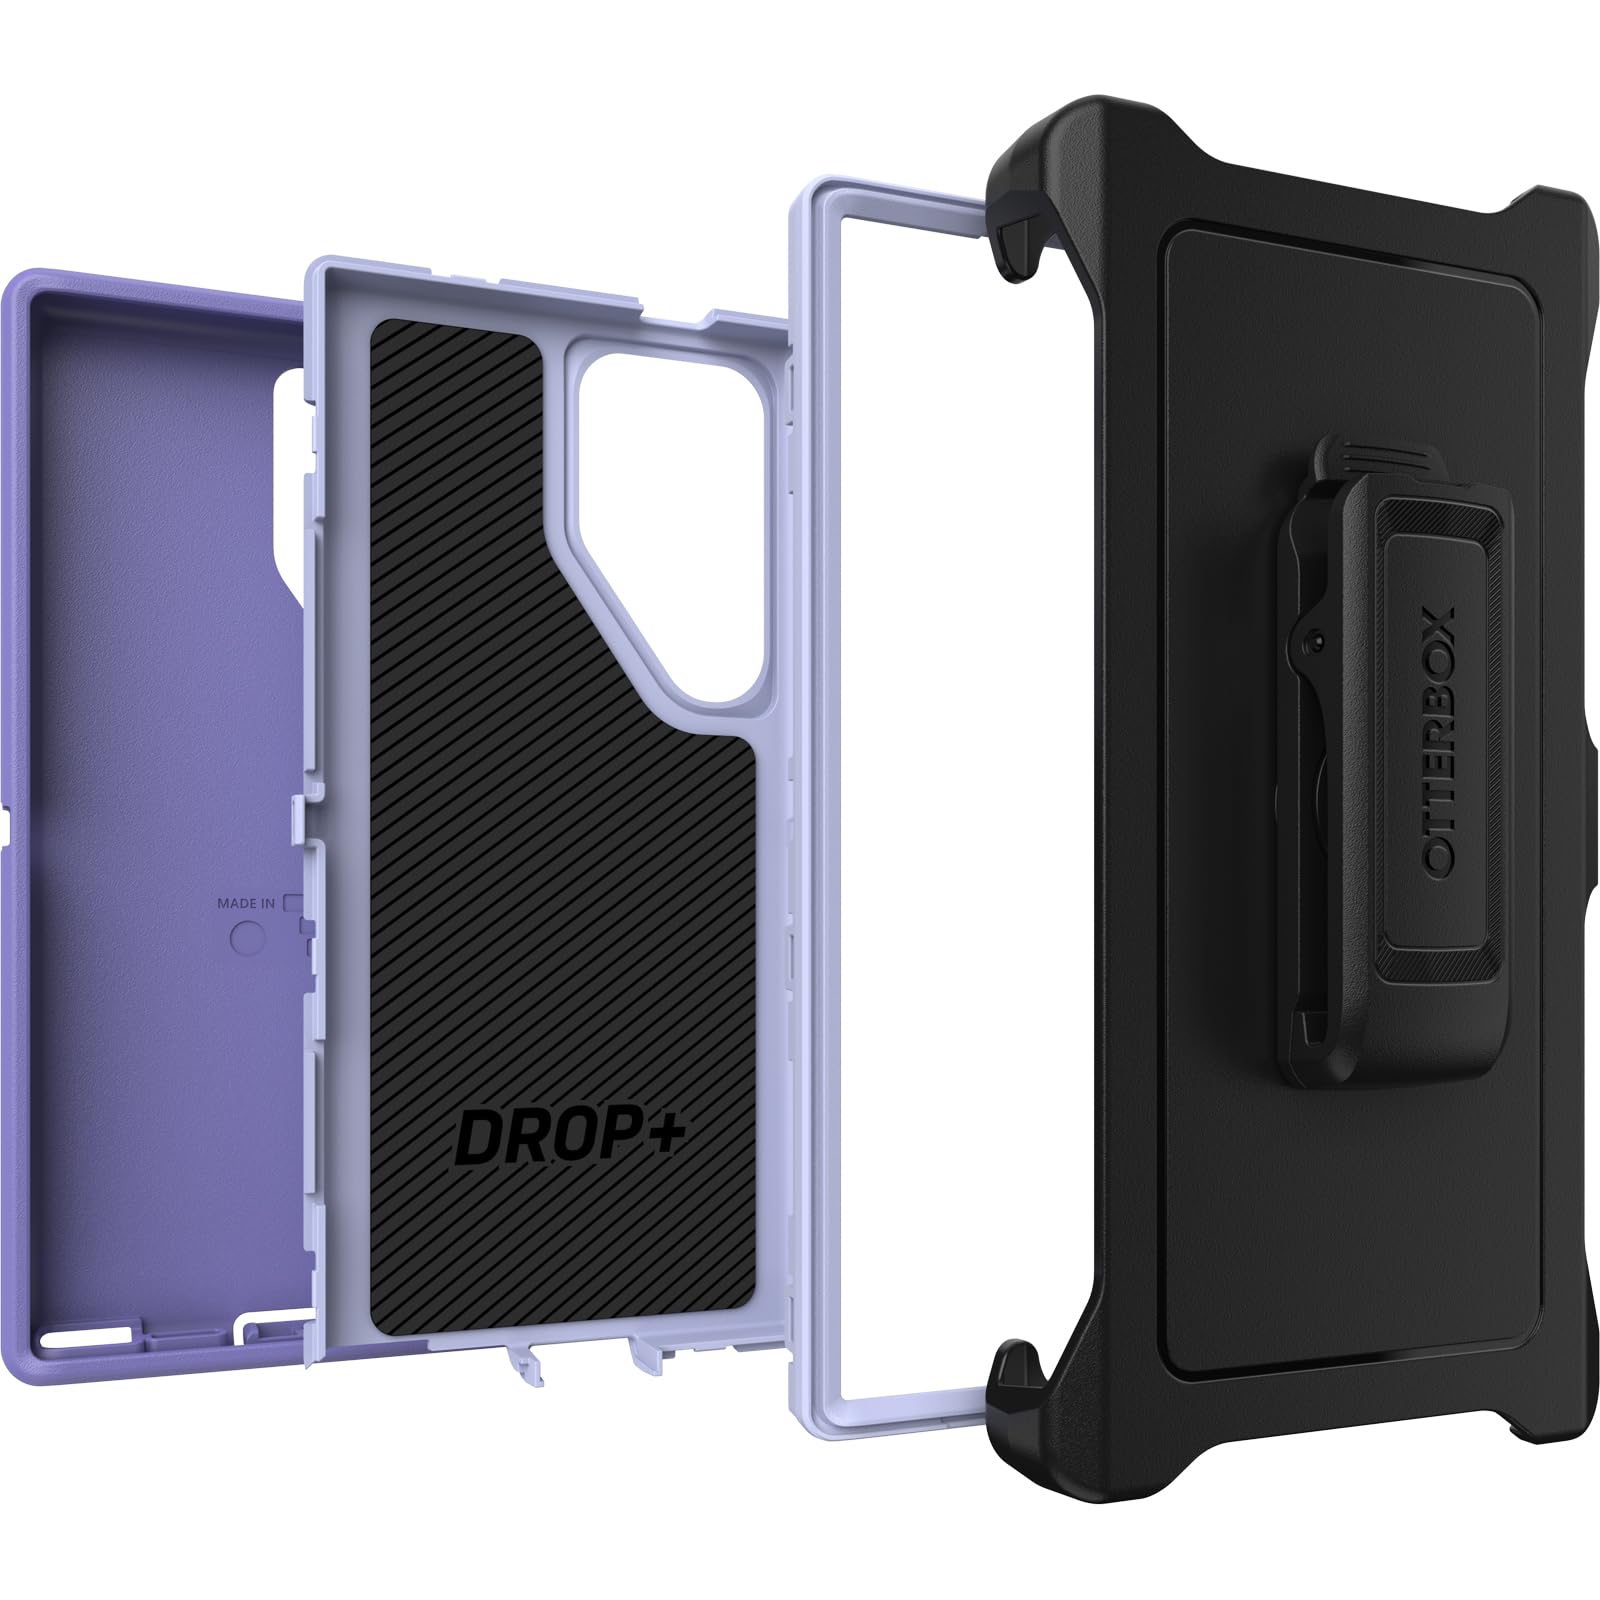 OtterBox Samsung Galaxy S24 Ultra Defender Series Case - MOUNATIN Majesty (Purple), Rugged & Durable, with Port Protection, Includes Holster Clip Kickstand